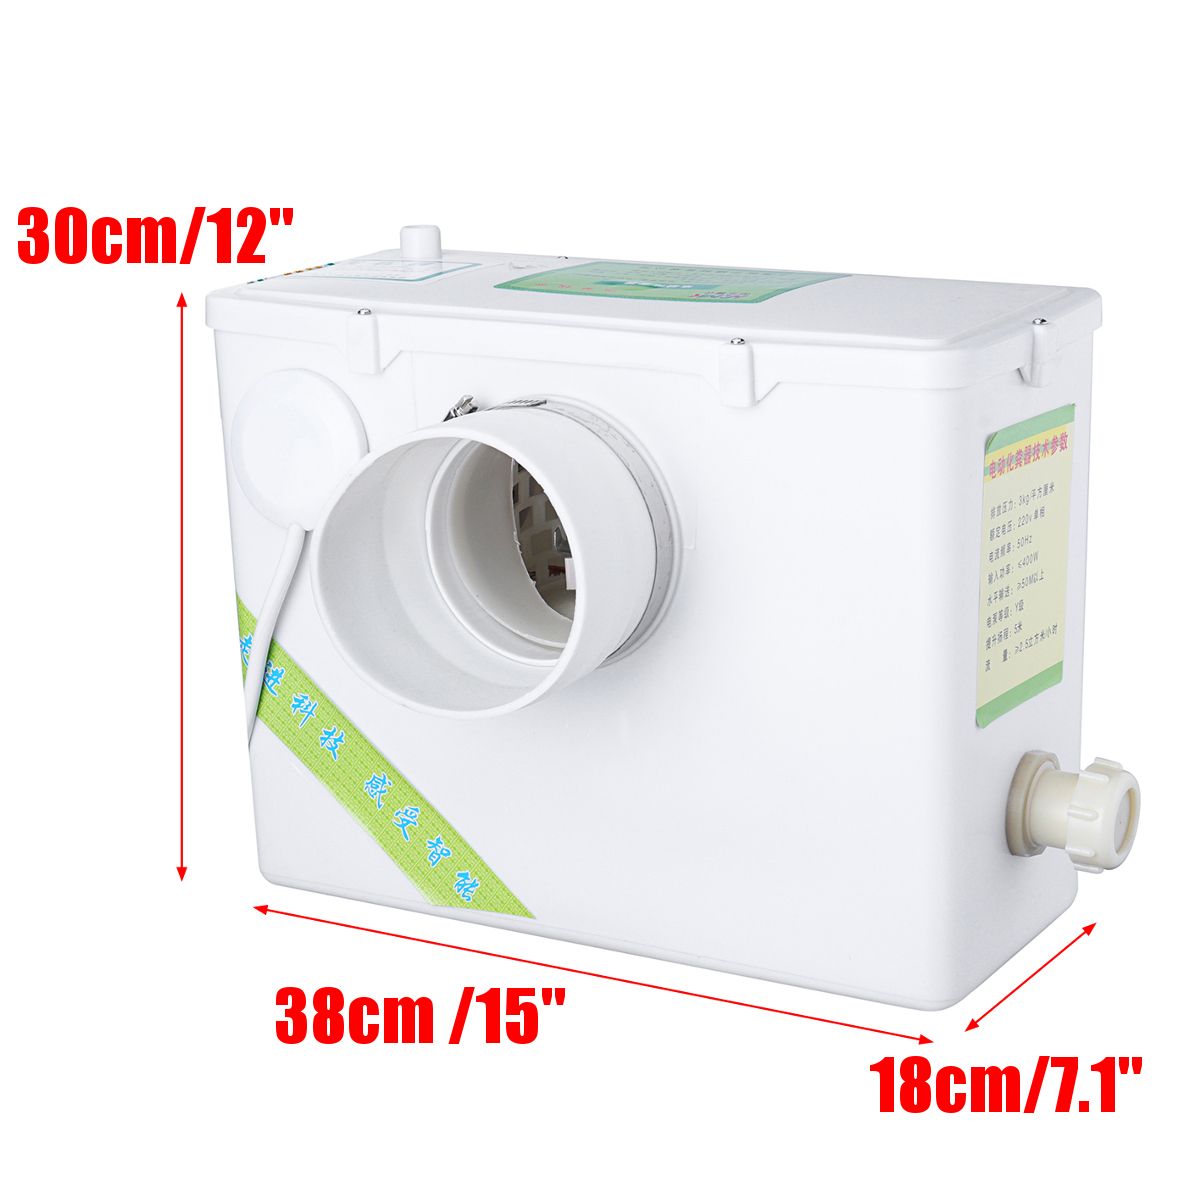 400W-220V-2-Outlet-Sanitary-Macerator-Pump-Auto-Disposal-Crush-Waste-Water-Toilet-Sink-1402024